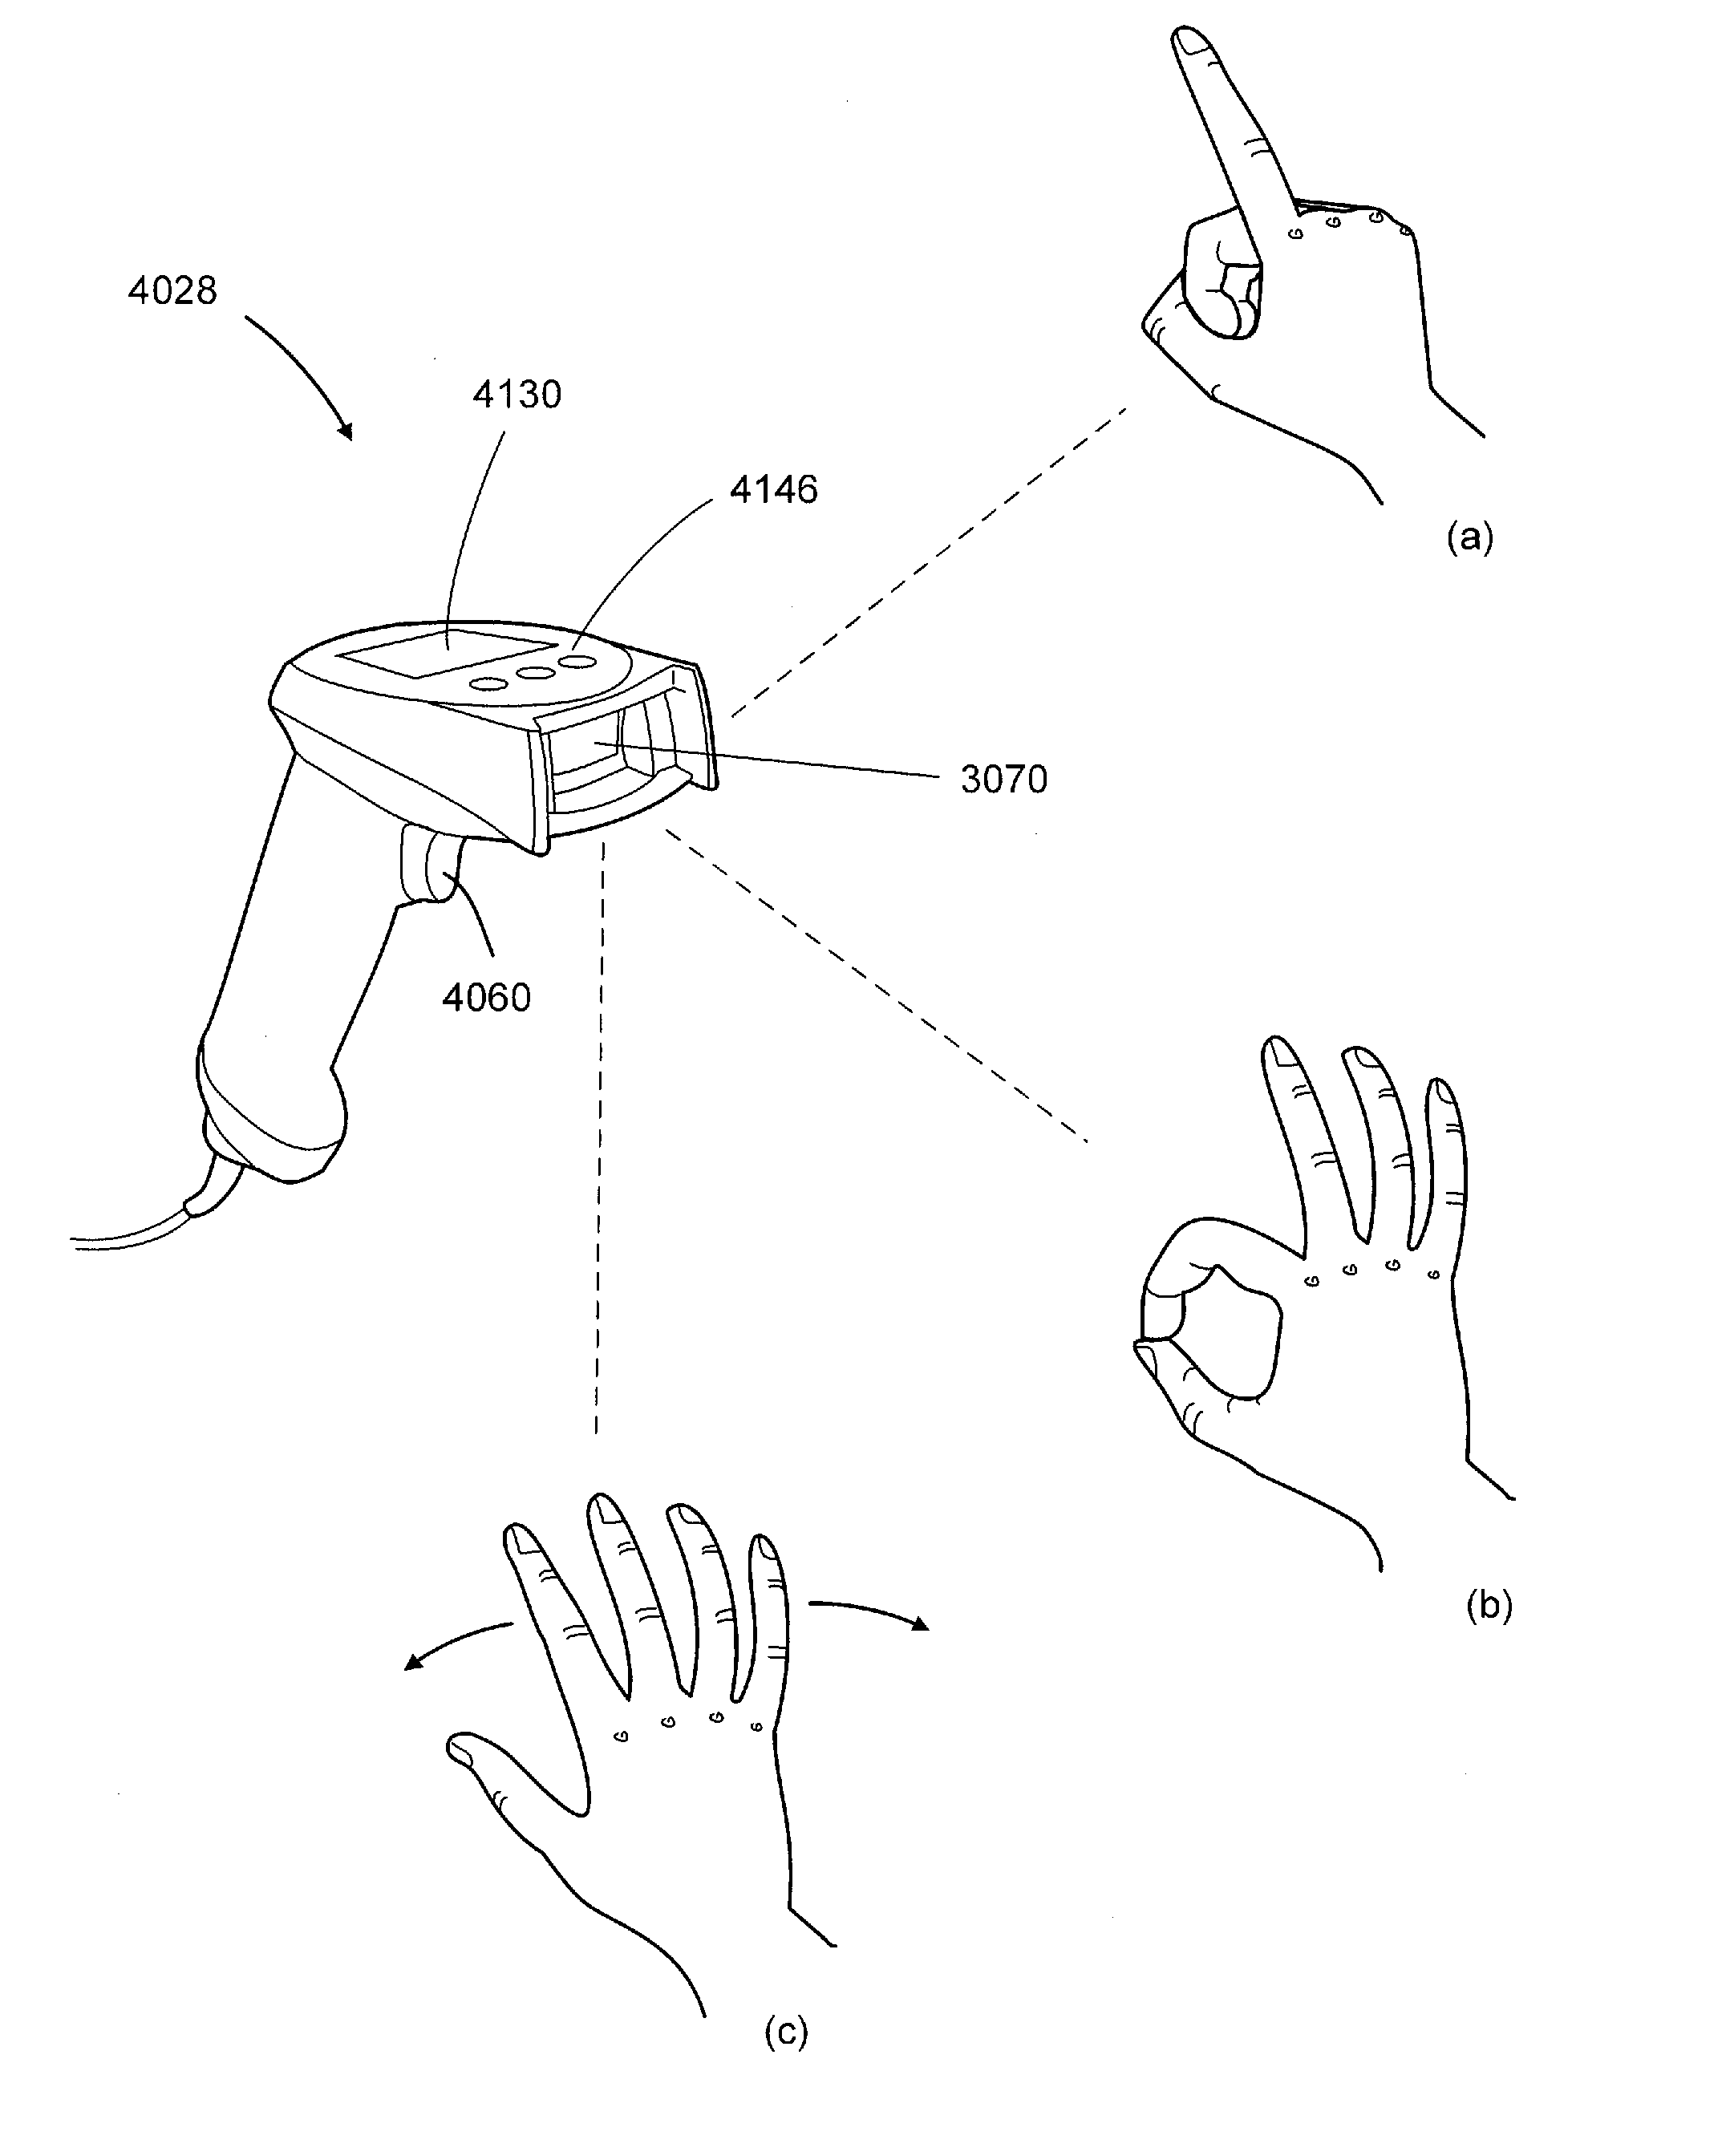 Imager reader with hand gesture interface